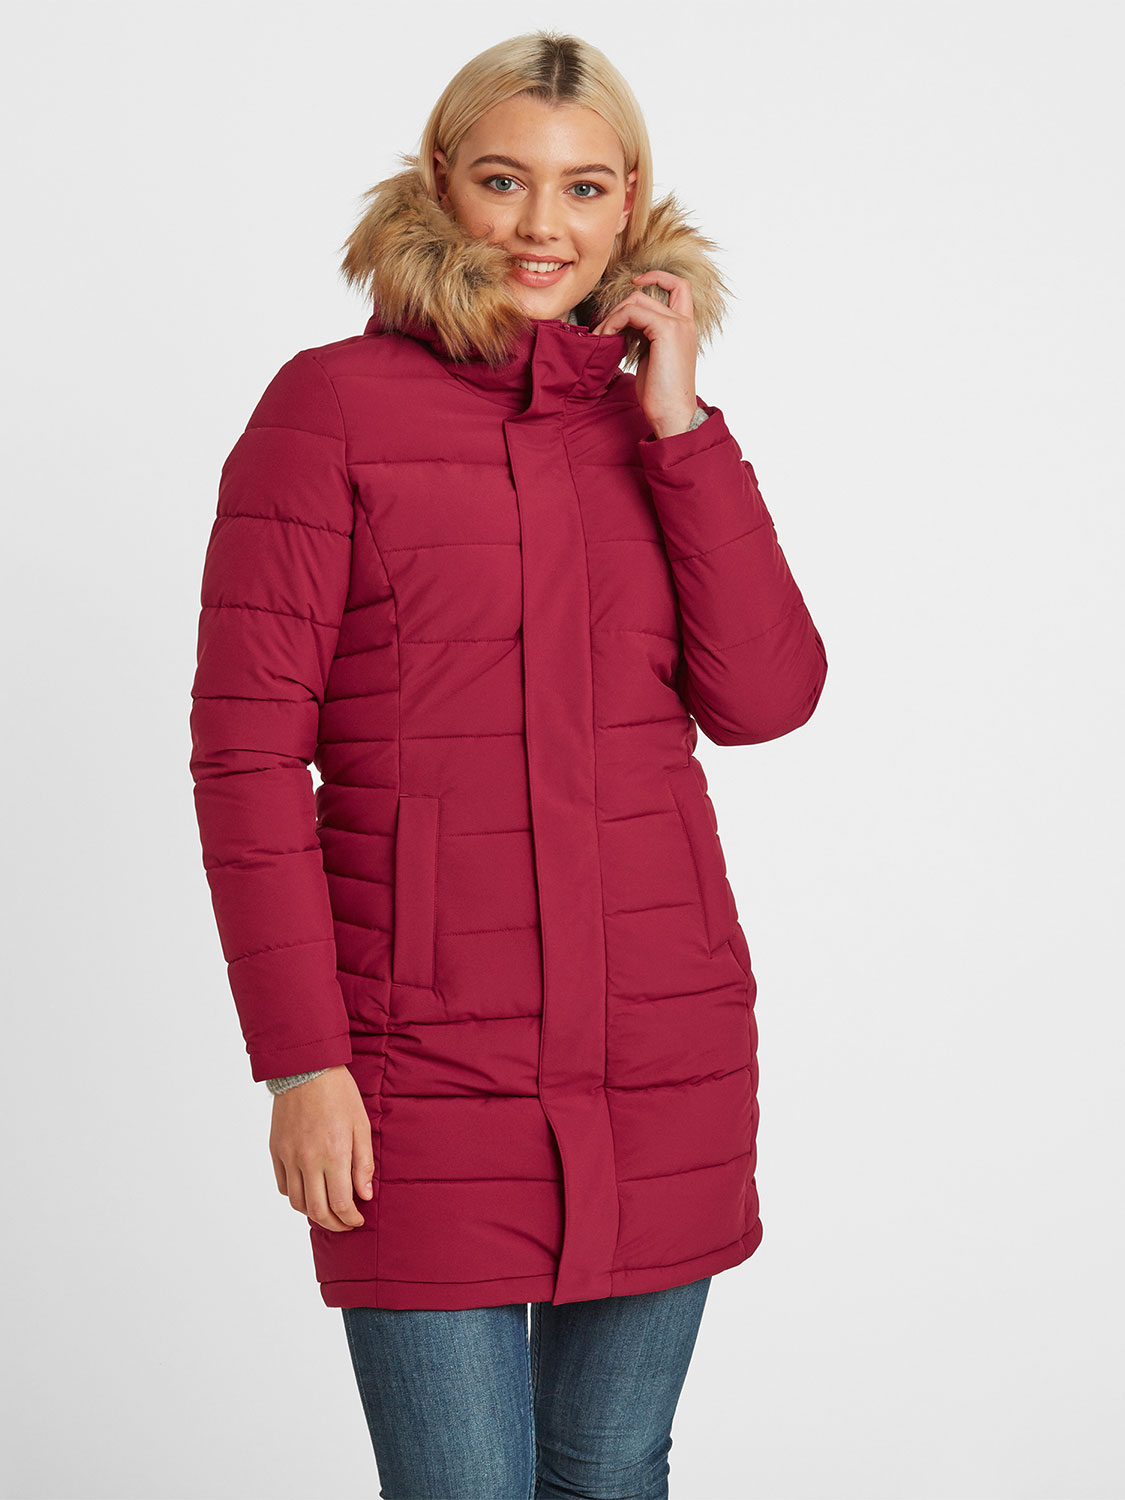 Firbeck Long Insulated Jacket - Size: 12 Pink Tog24